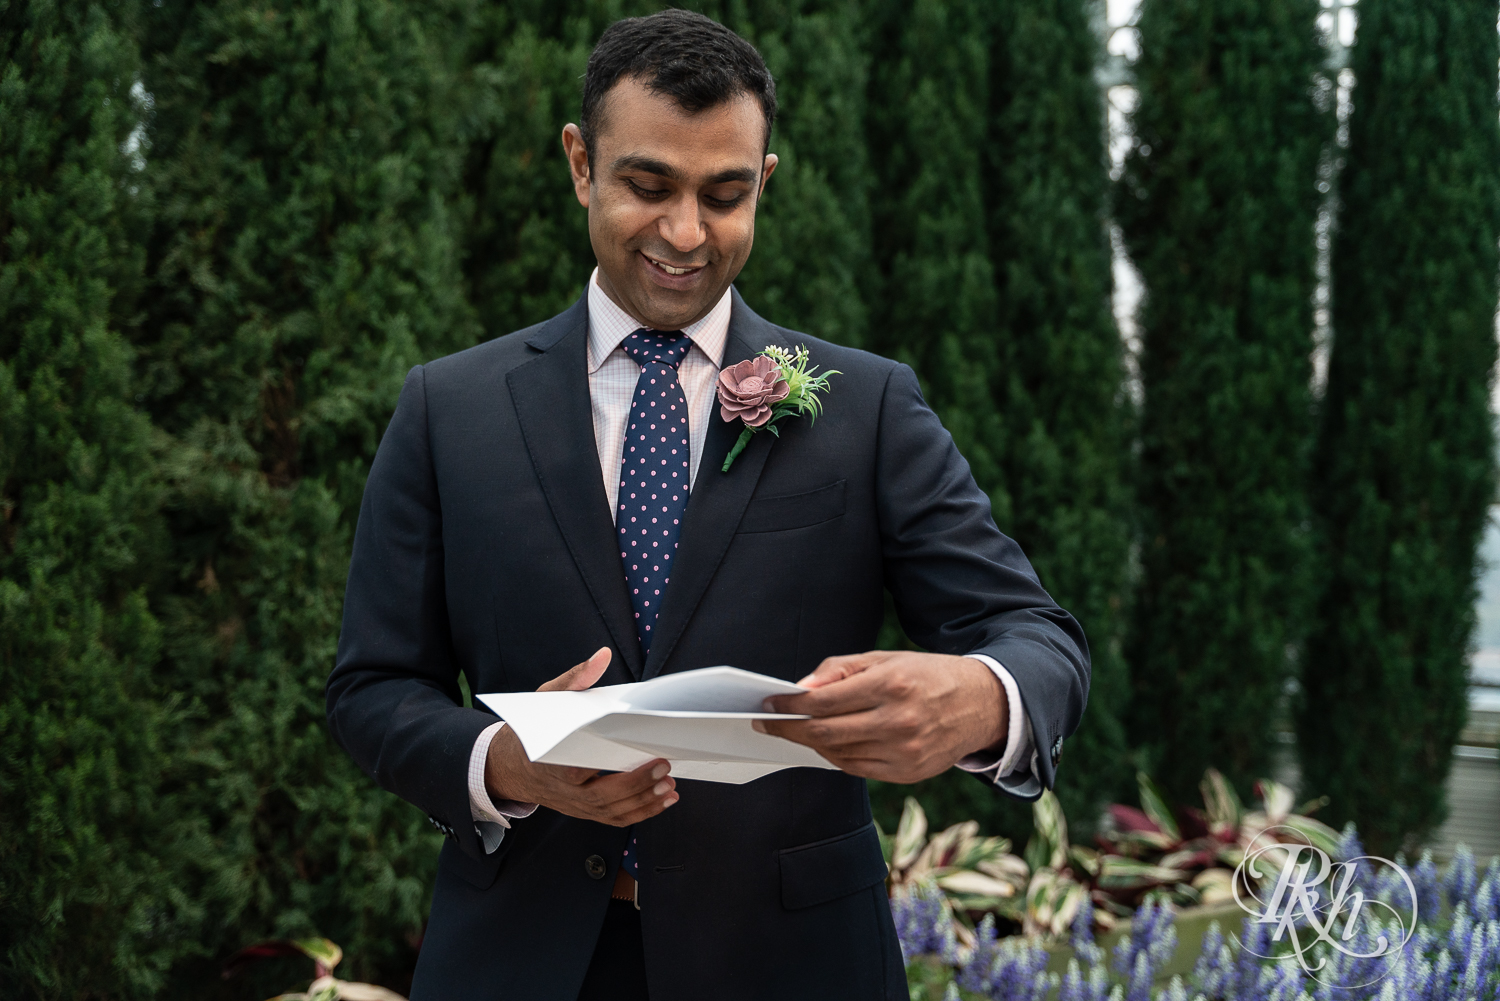 Groom reading vows at Indian wedding at Como Zoo Conservatory in Saint Paul, Minnesota.